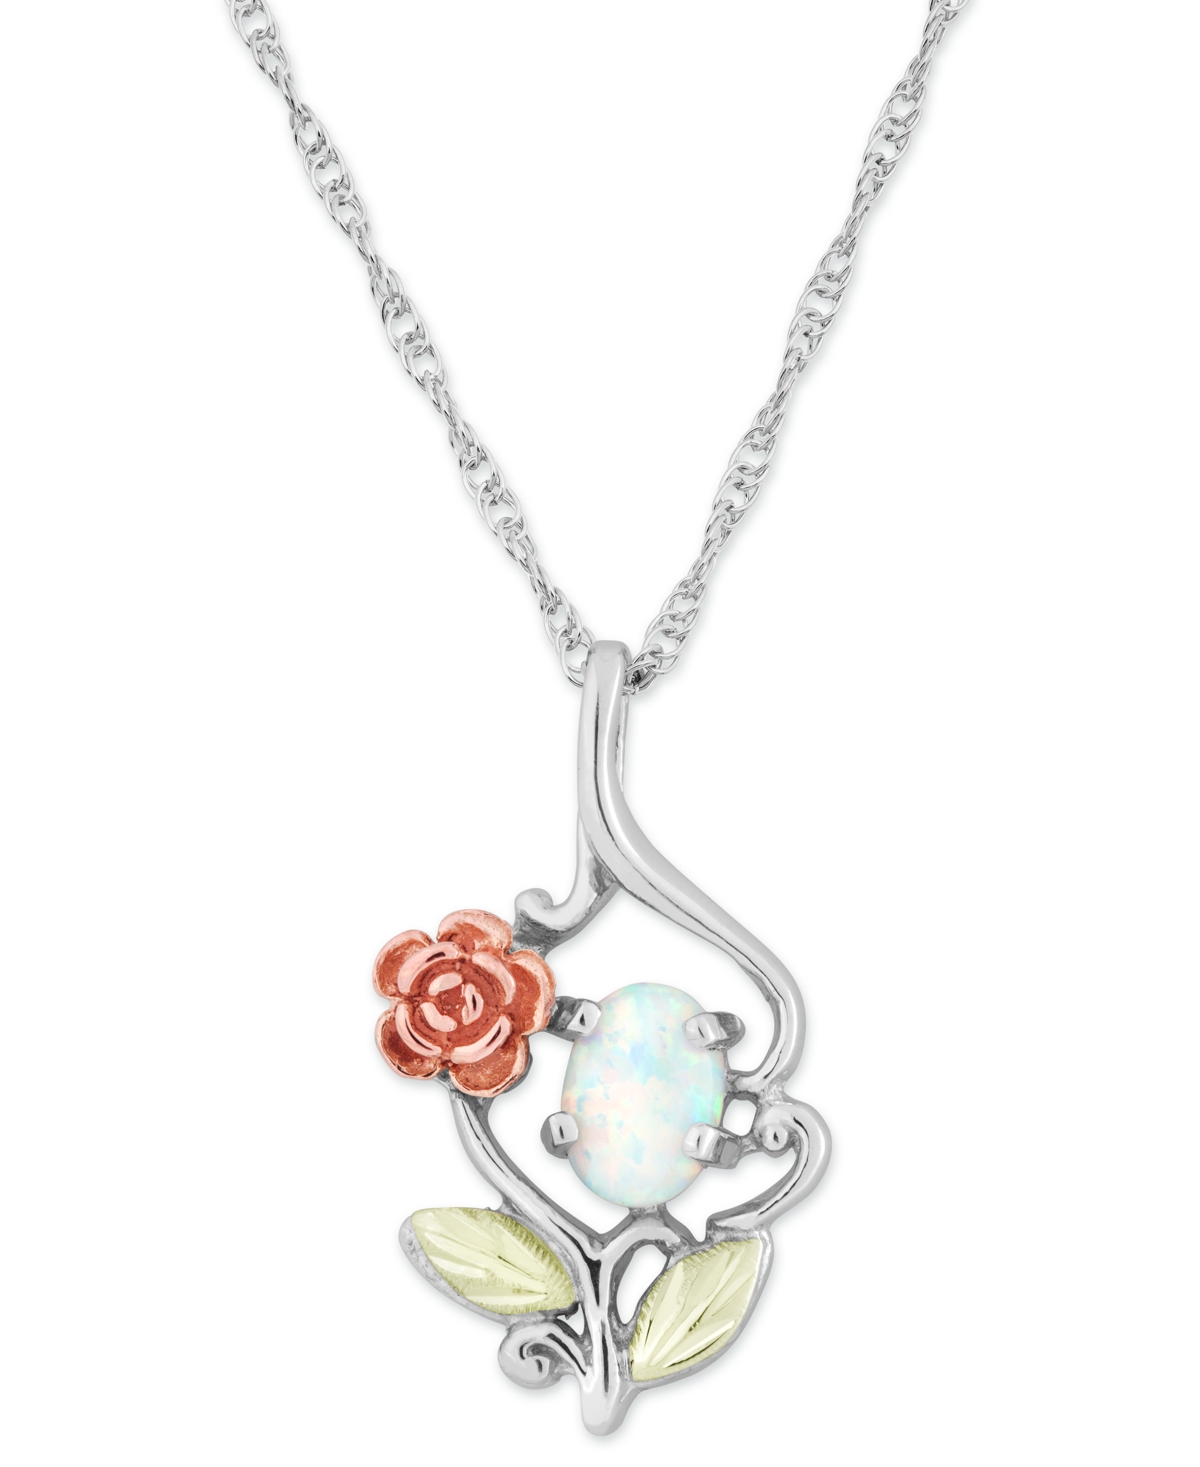 White Opal (7x5mm) Rose Pendant 18" Necklace in Sterling Silver with 12k Rose and Green Gold - Ss